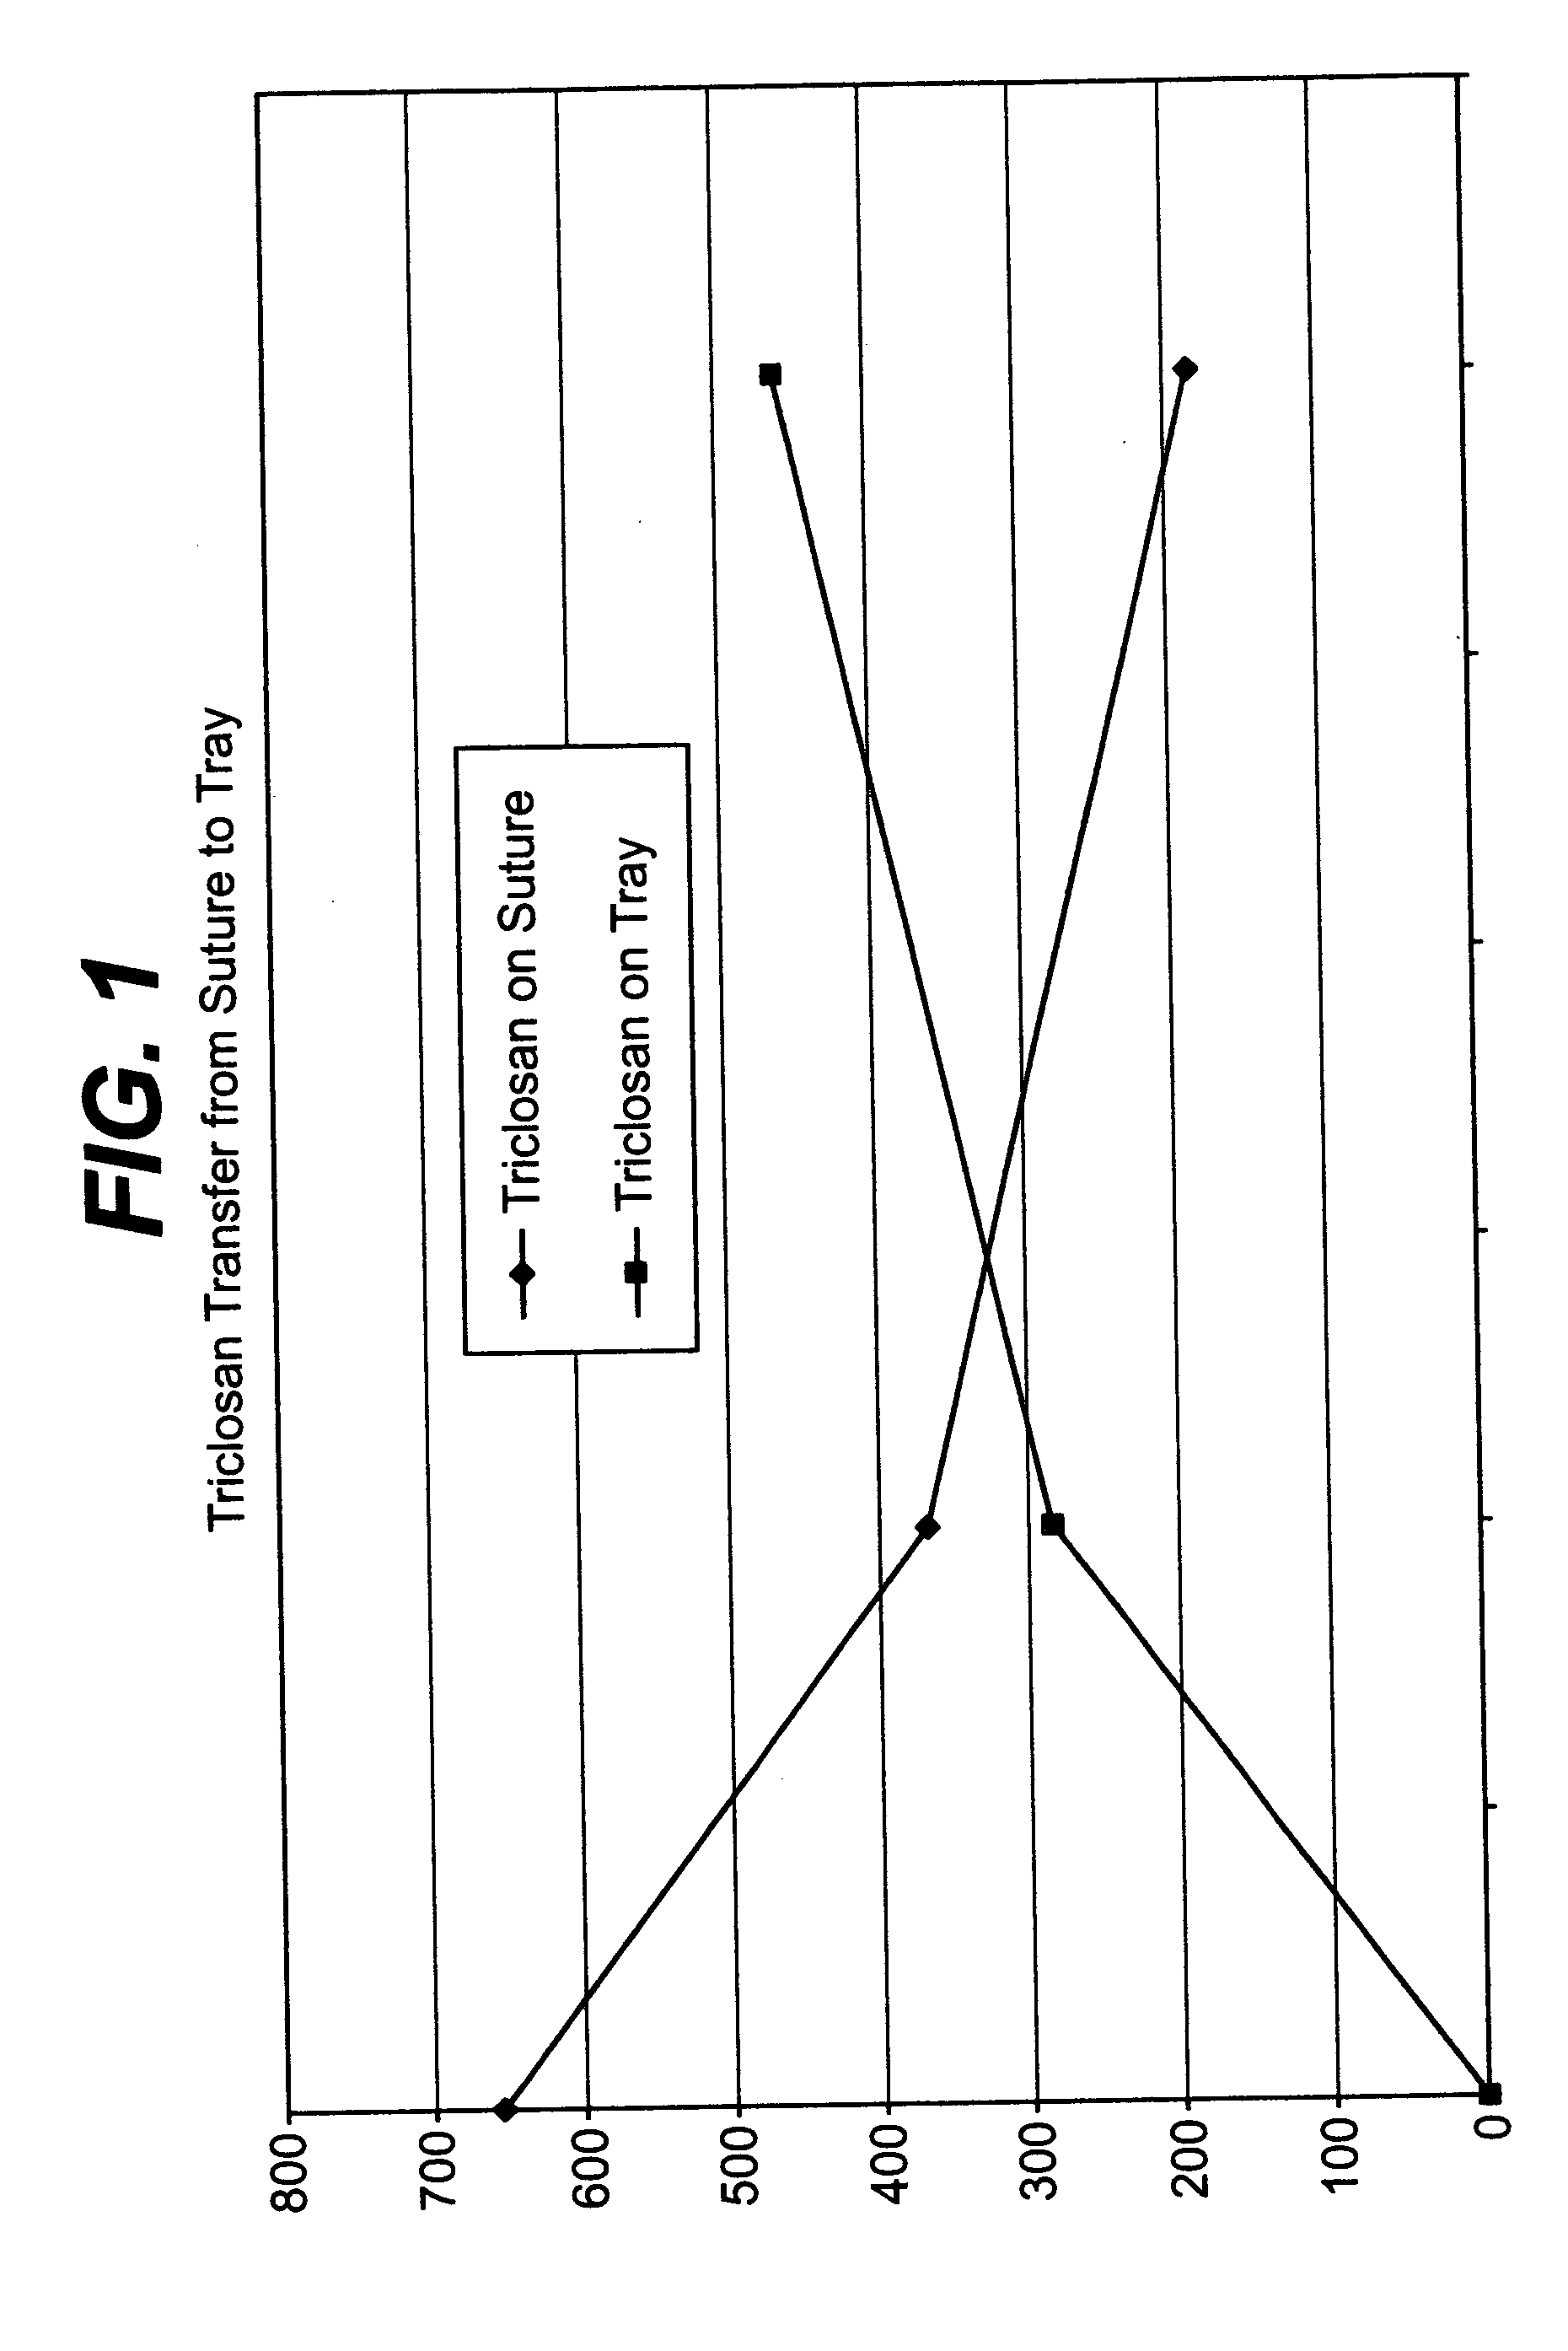 Antimicrobial packaged medical device and method of preparing same